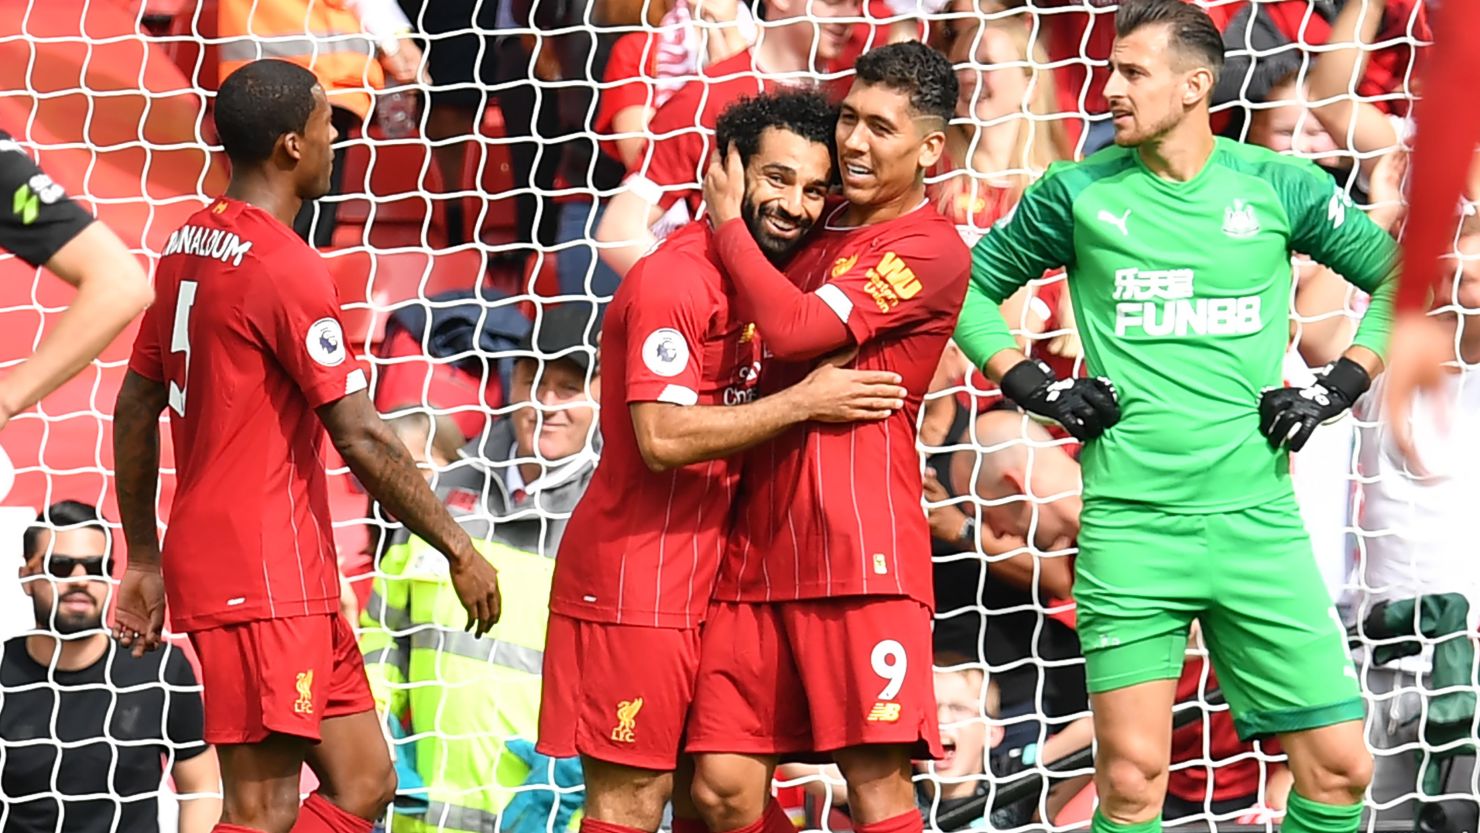 Mohamed Salah and Roberto Firmino celebrate Liverpool's third goal.